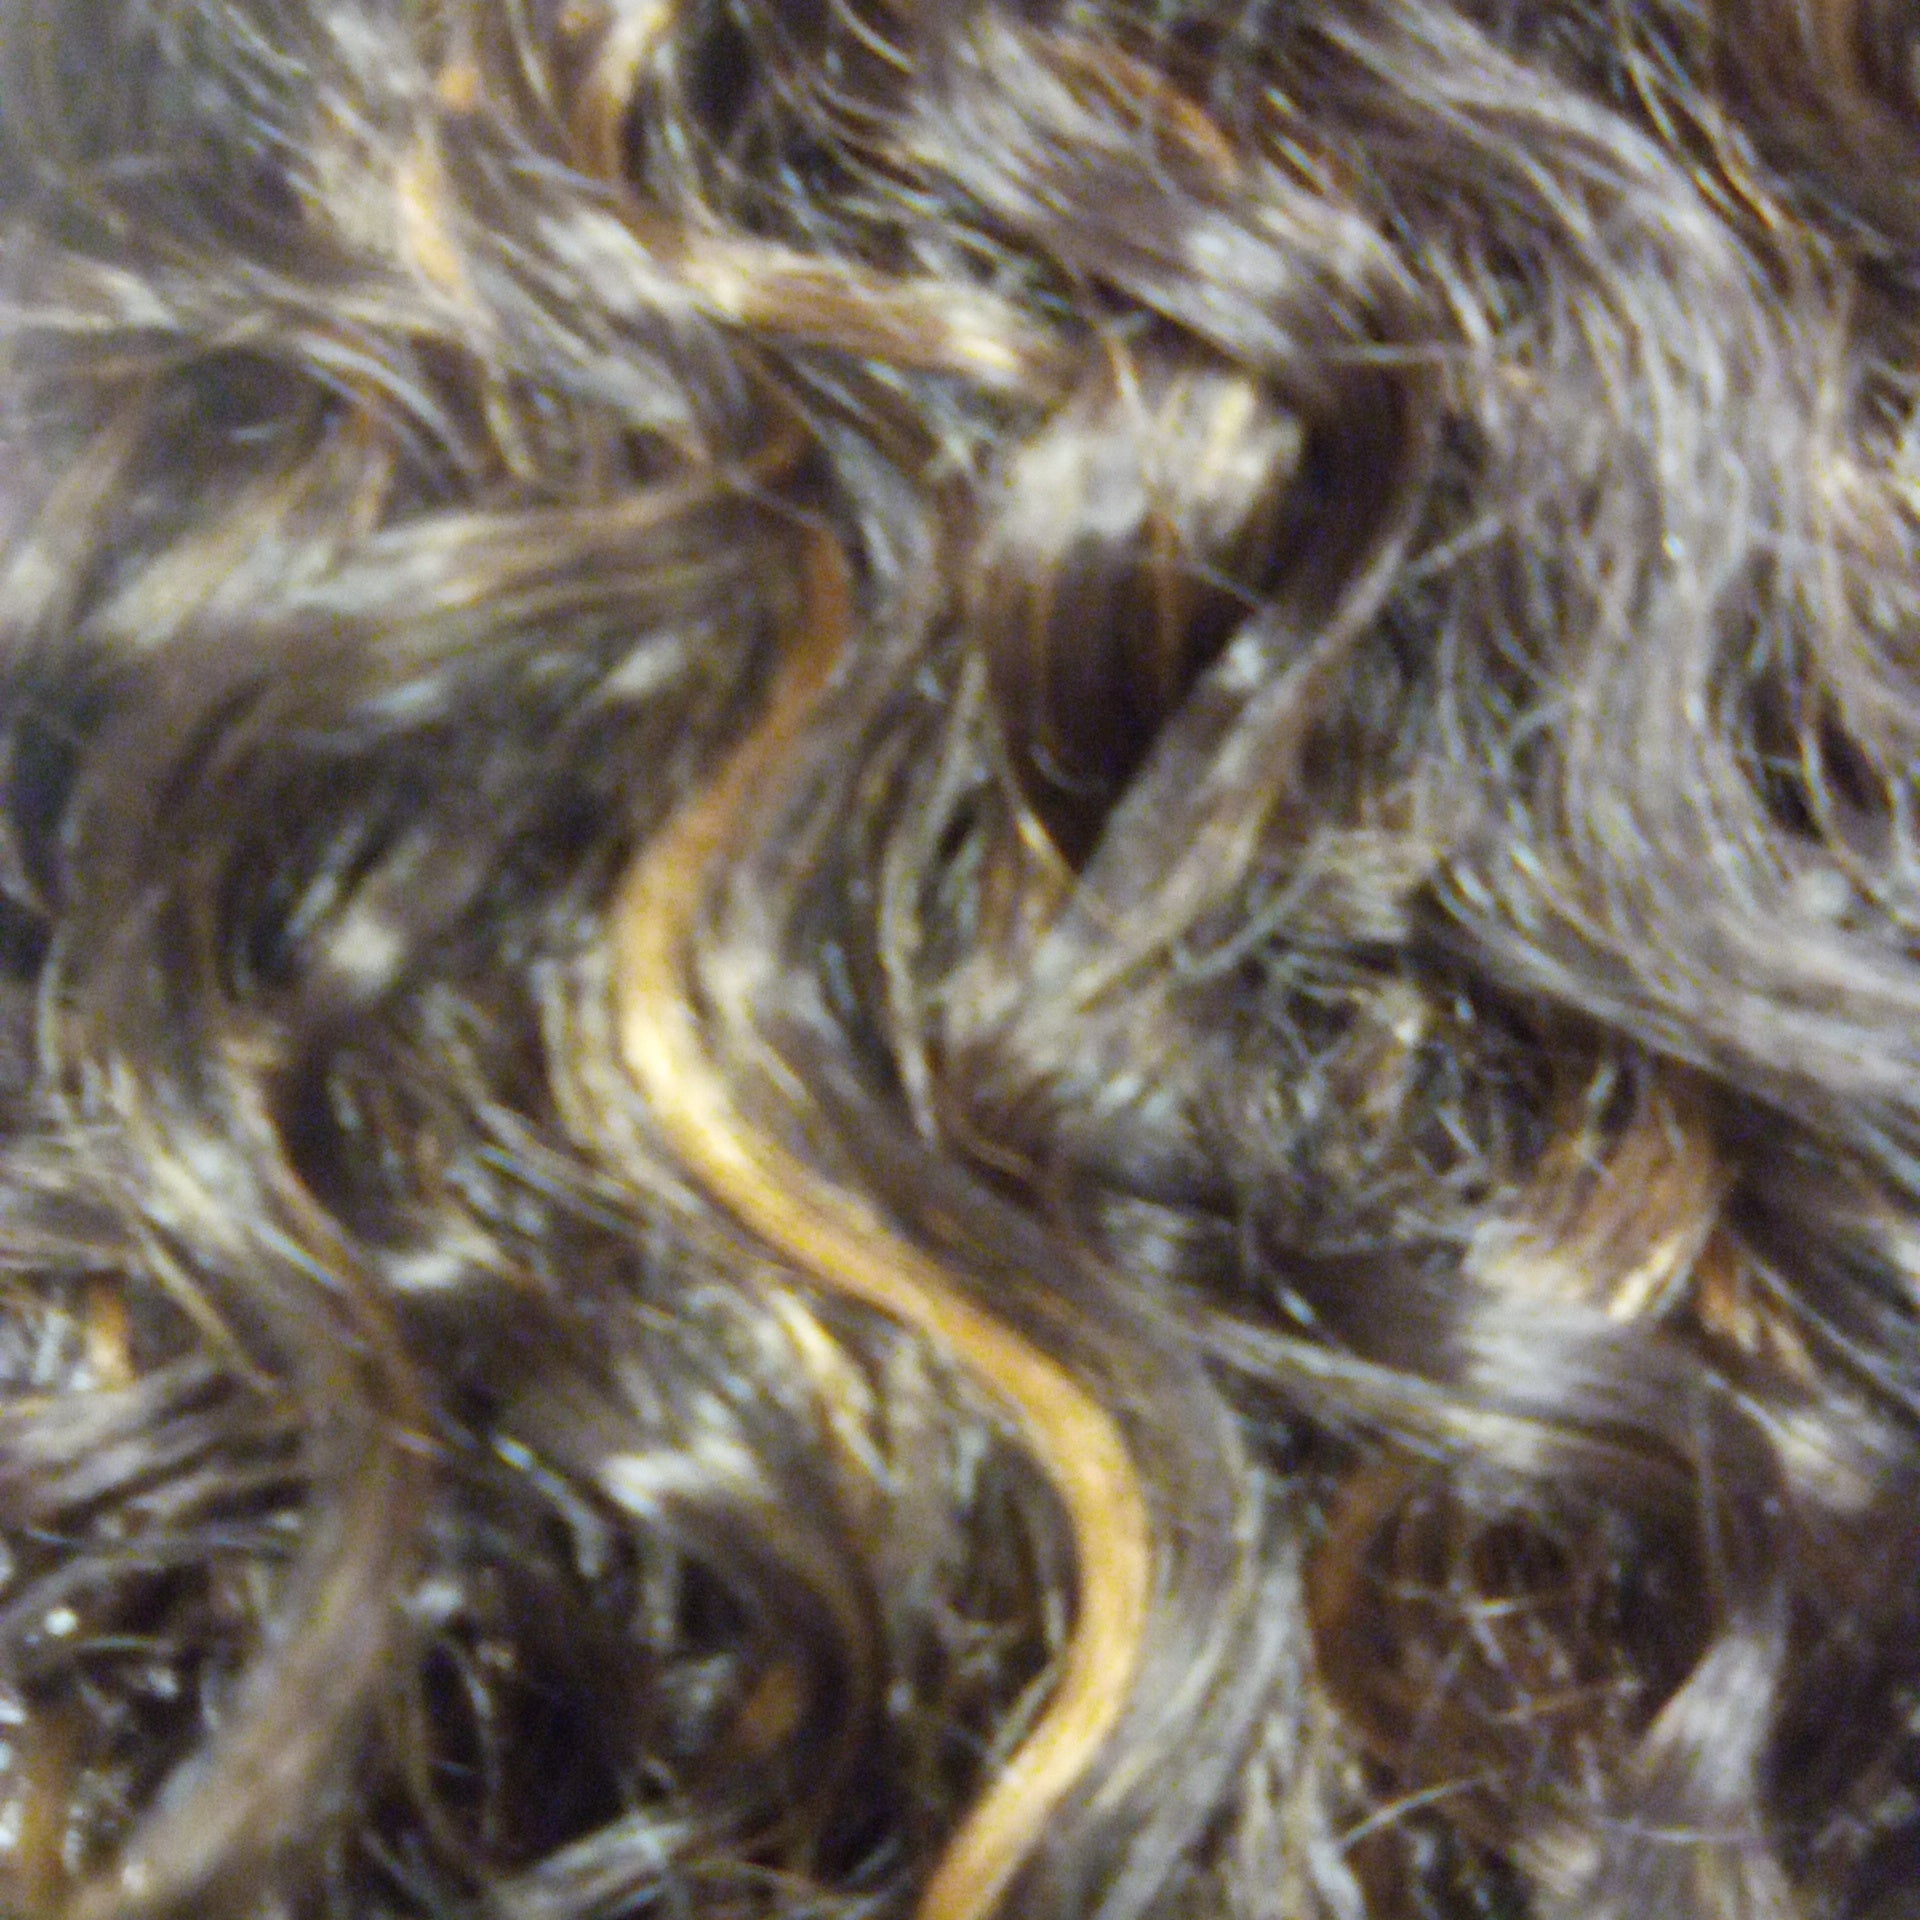 Hair Republic Swiss Lace Front NBS-i1990 - Beauty Bar & Supply